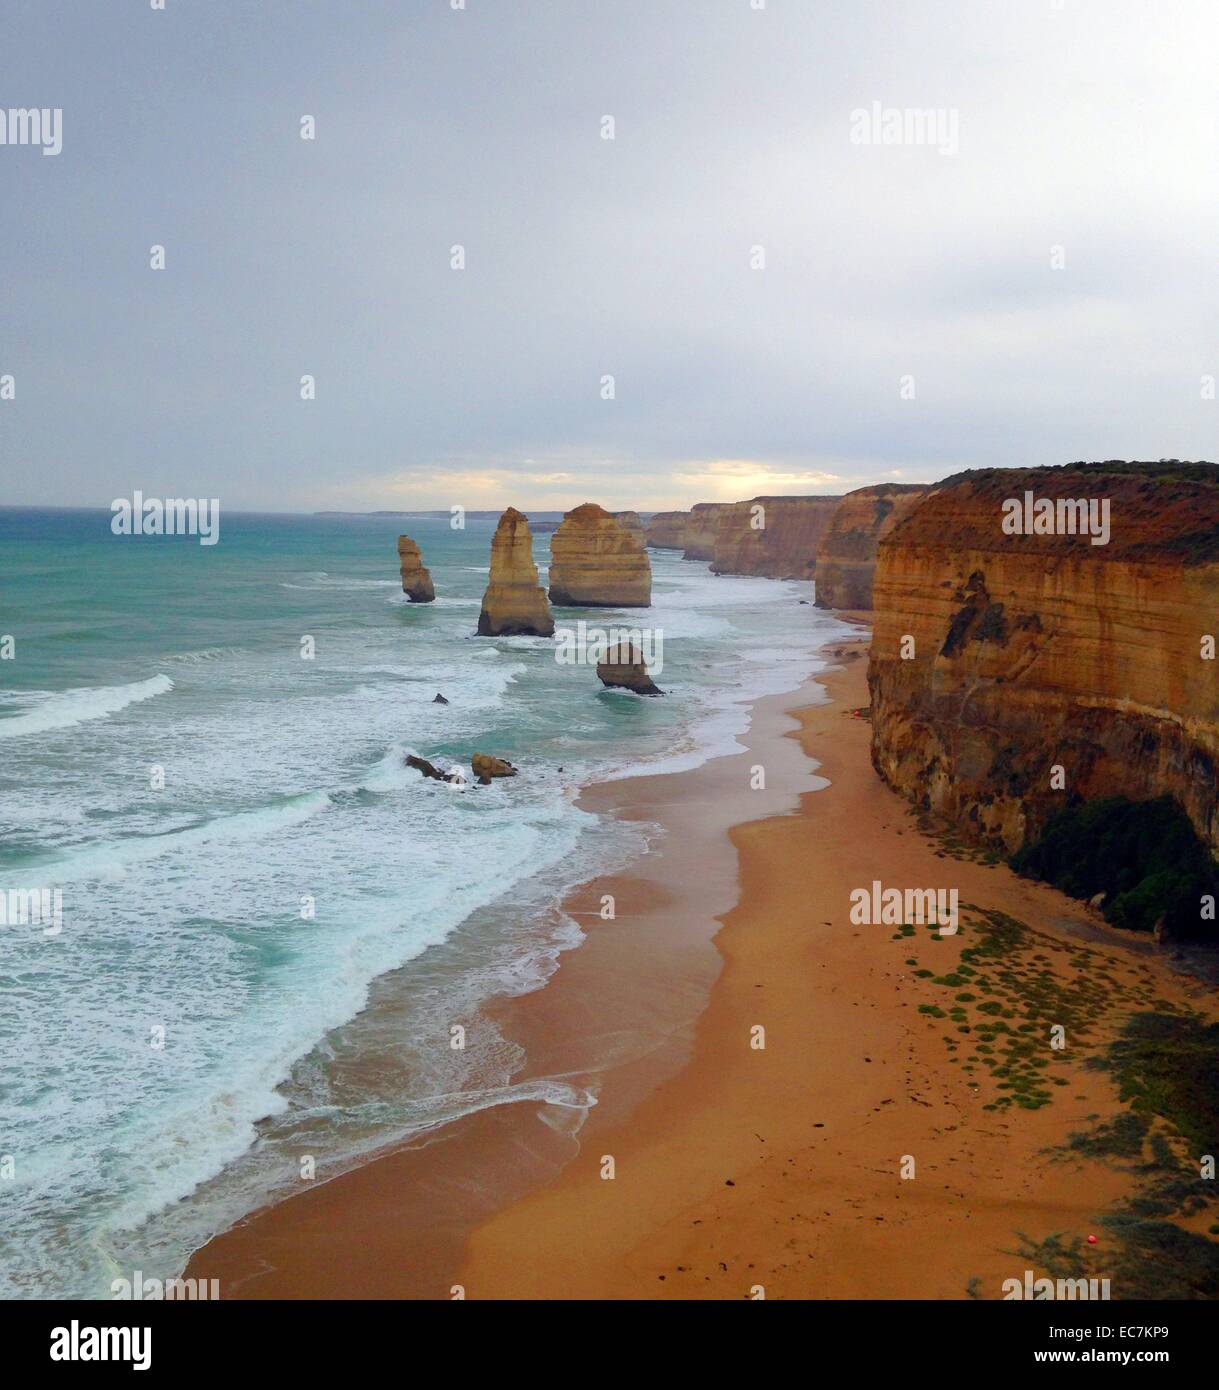 The Twelve Apostles is a collection of limestone stacks off the shore of the Port Campbell National Park, by the Great Ocean Road in Victoria, Australia. Their proximity to one another has made the site a popular tourist attraction. Stock Photo